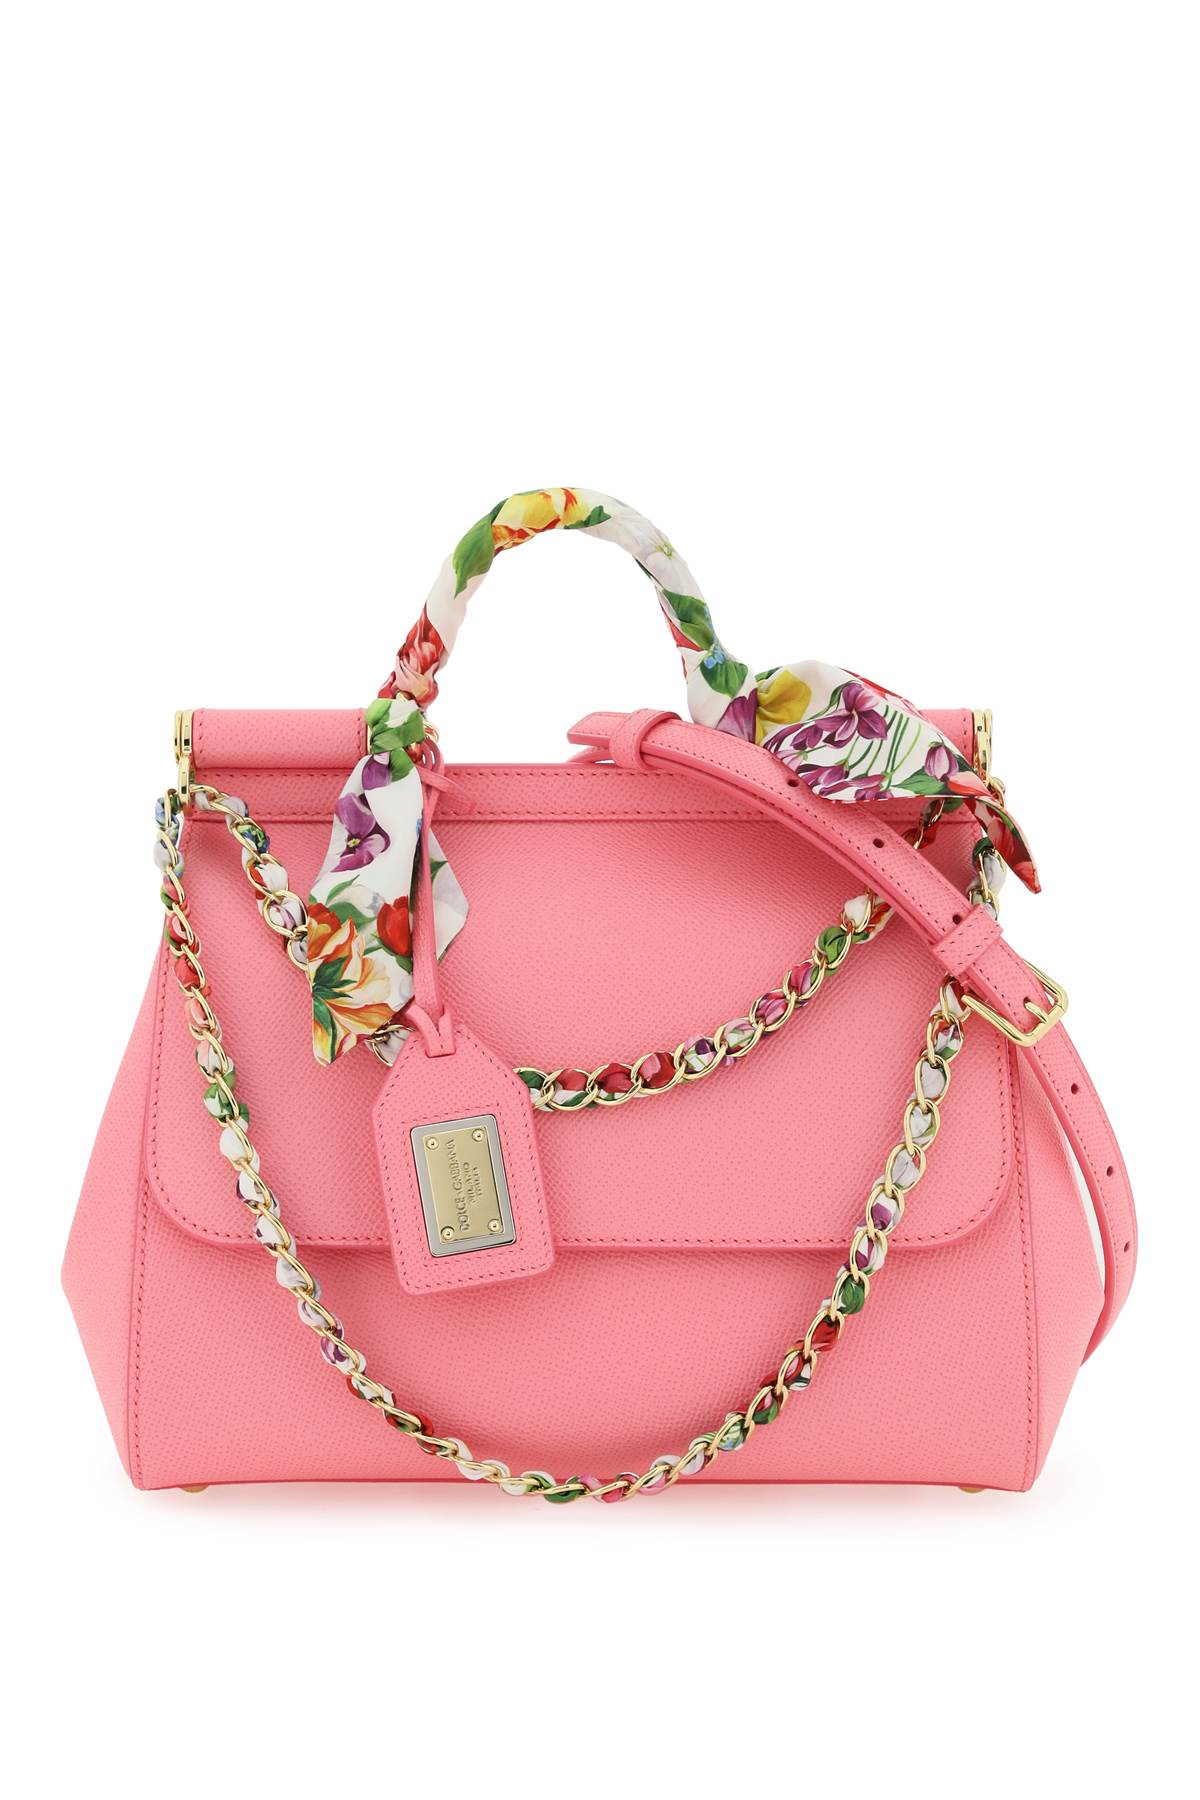 Dolce & Gabbana Hand Bag From The Sicily Line In Medium Size in Pink